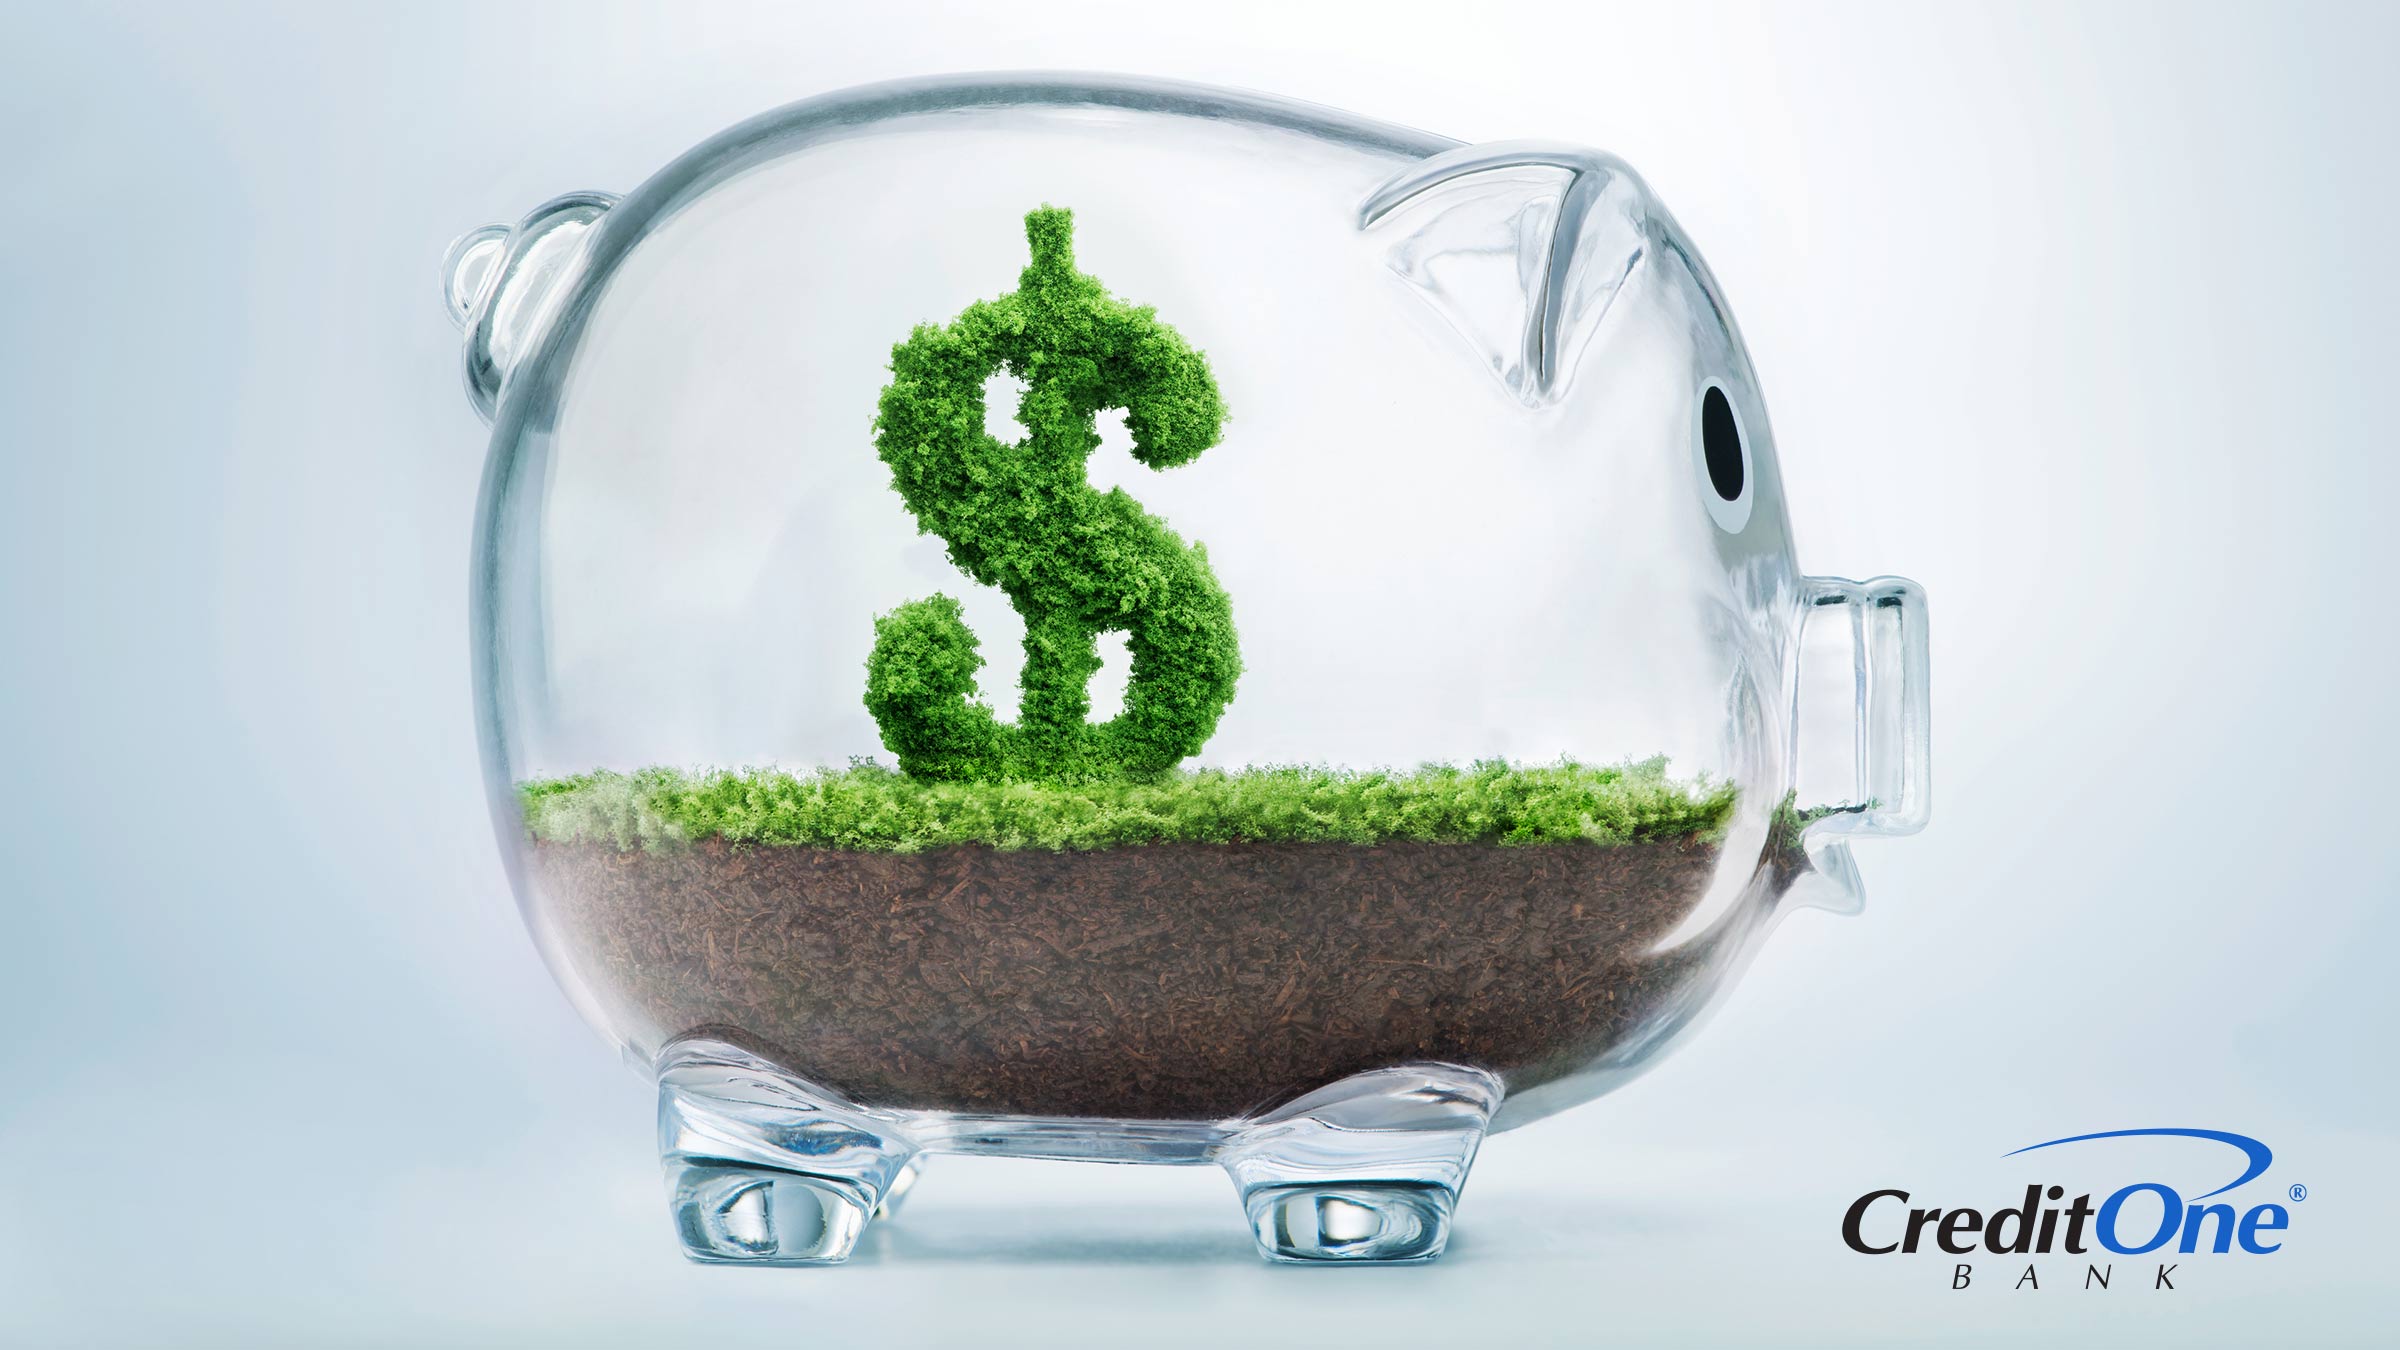 A clear piggy bank is filled with soil and a plant growing in the shape of a dollar sign, signifying a savings account growing.